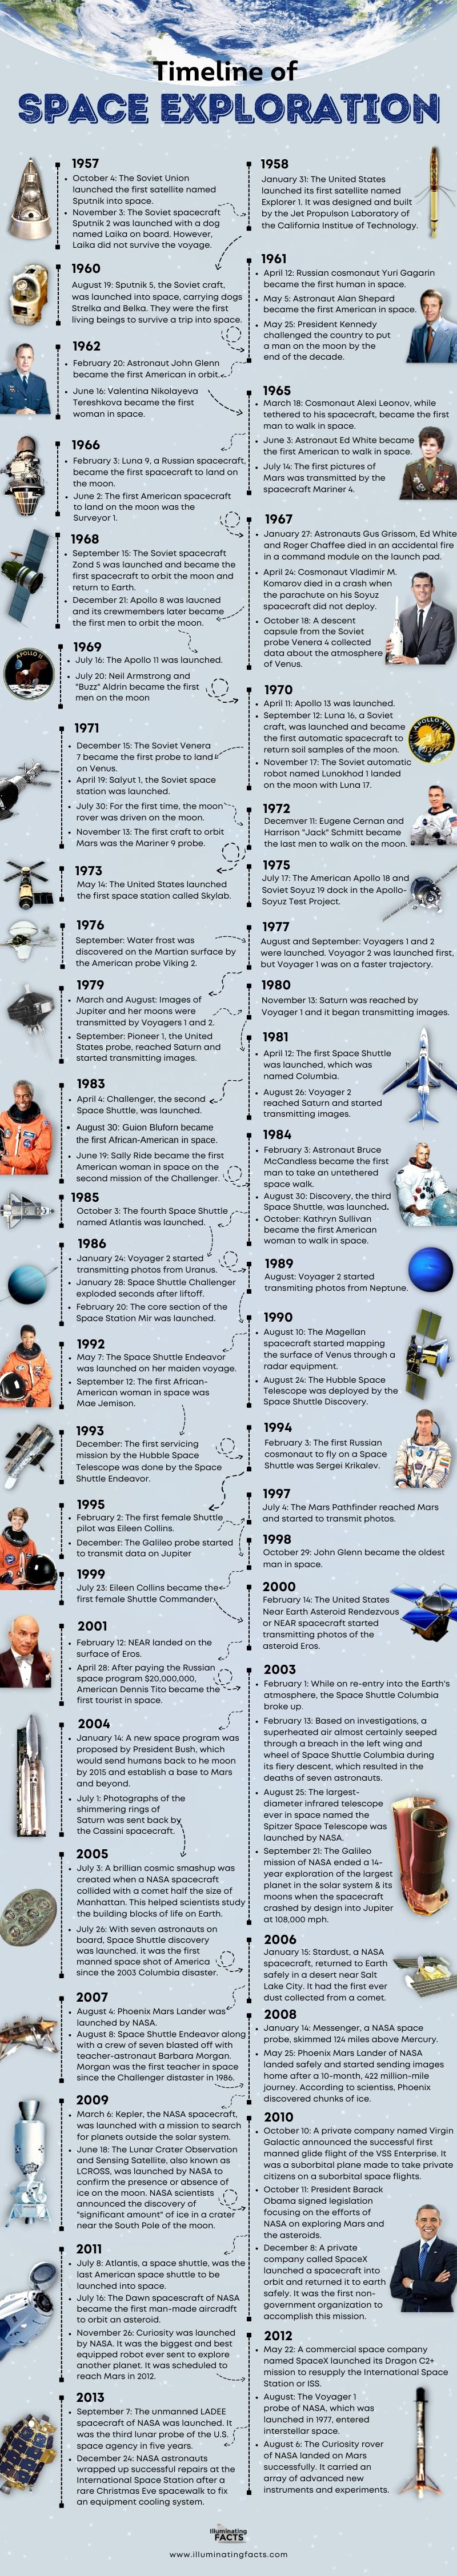 TIMELINE OF SPACE EXPLORATION